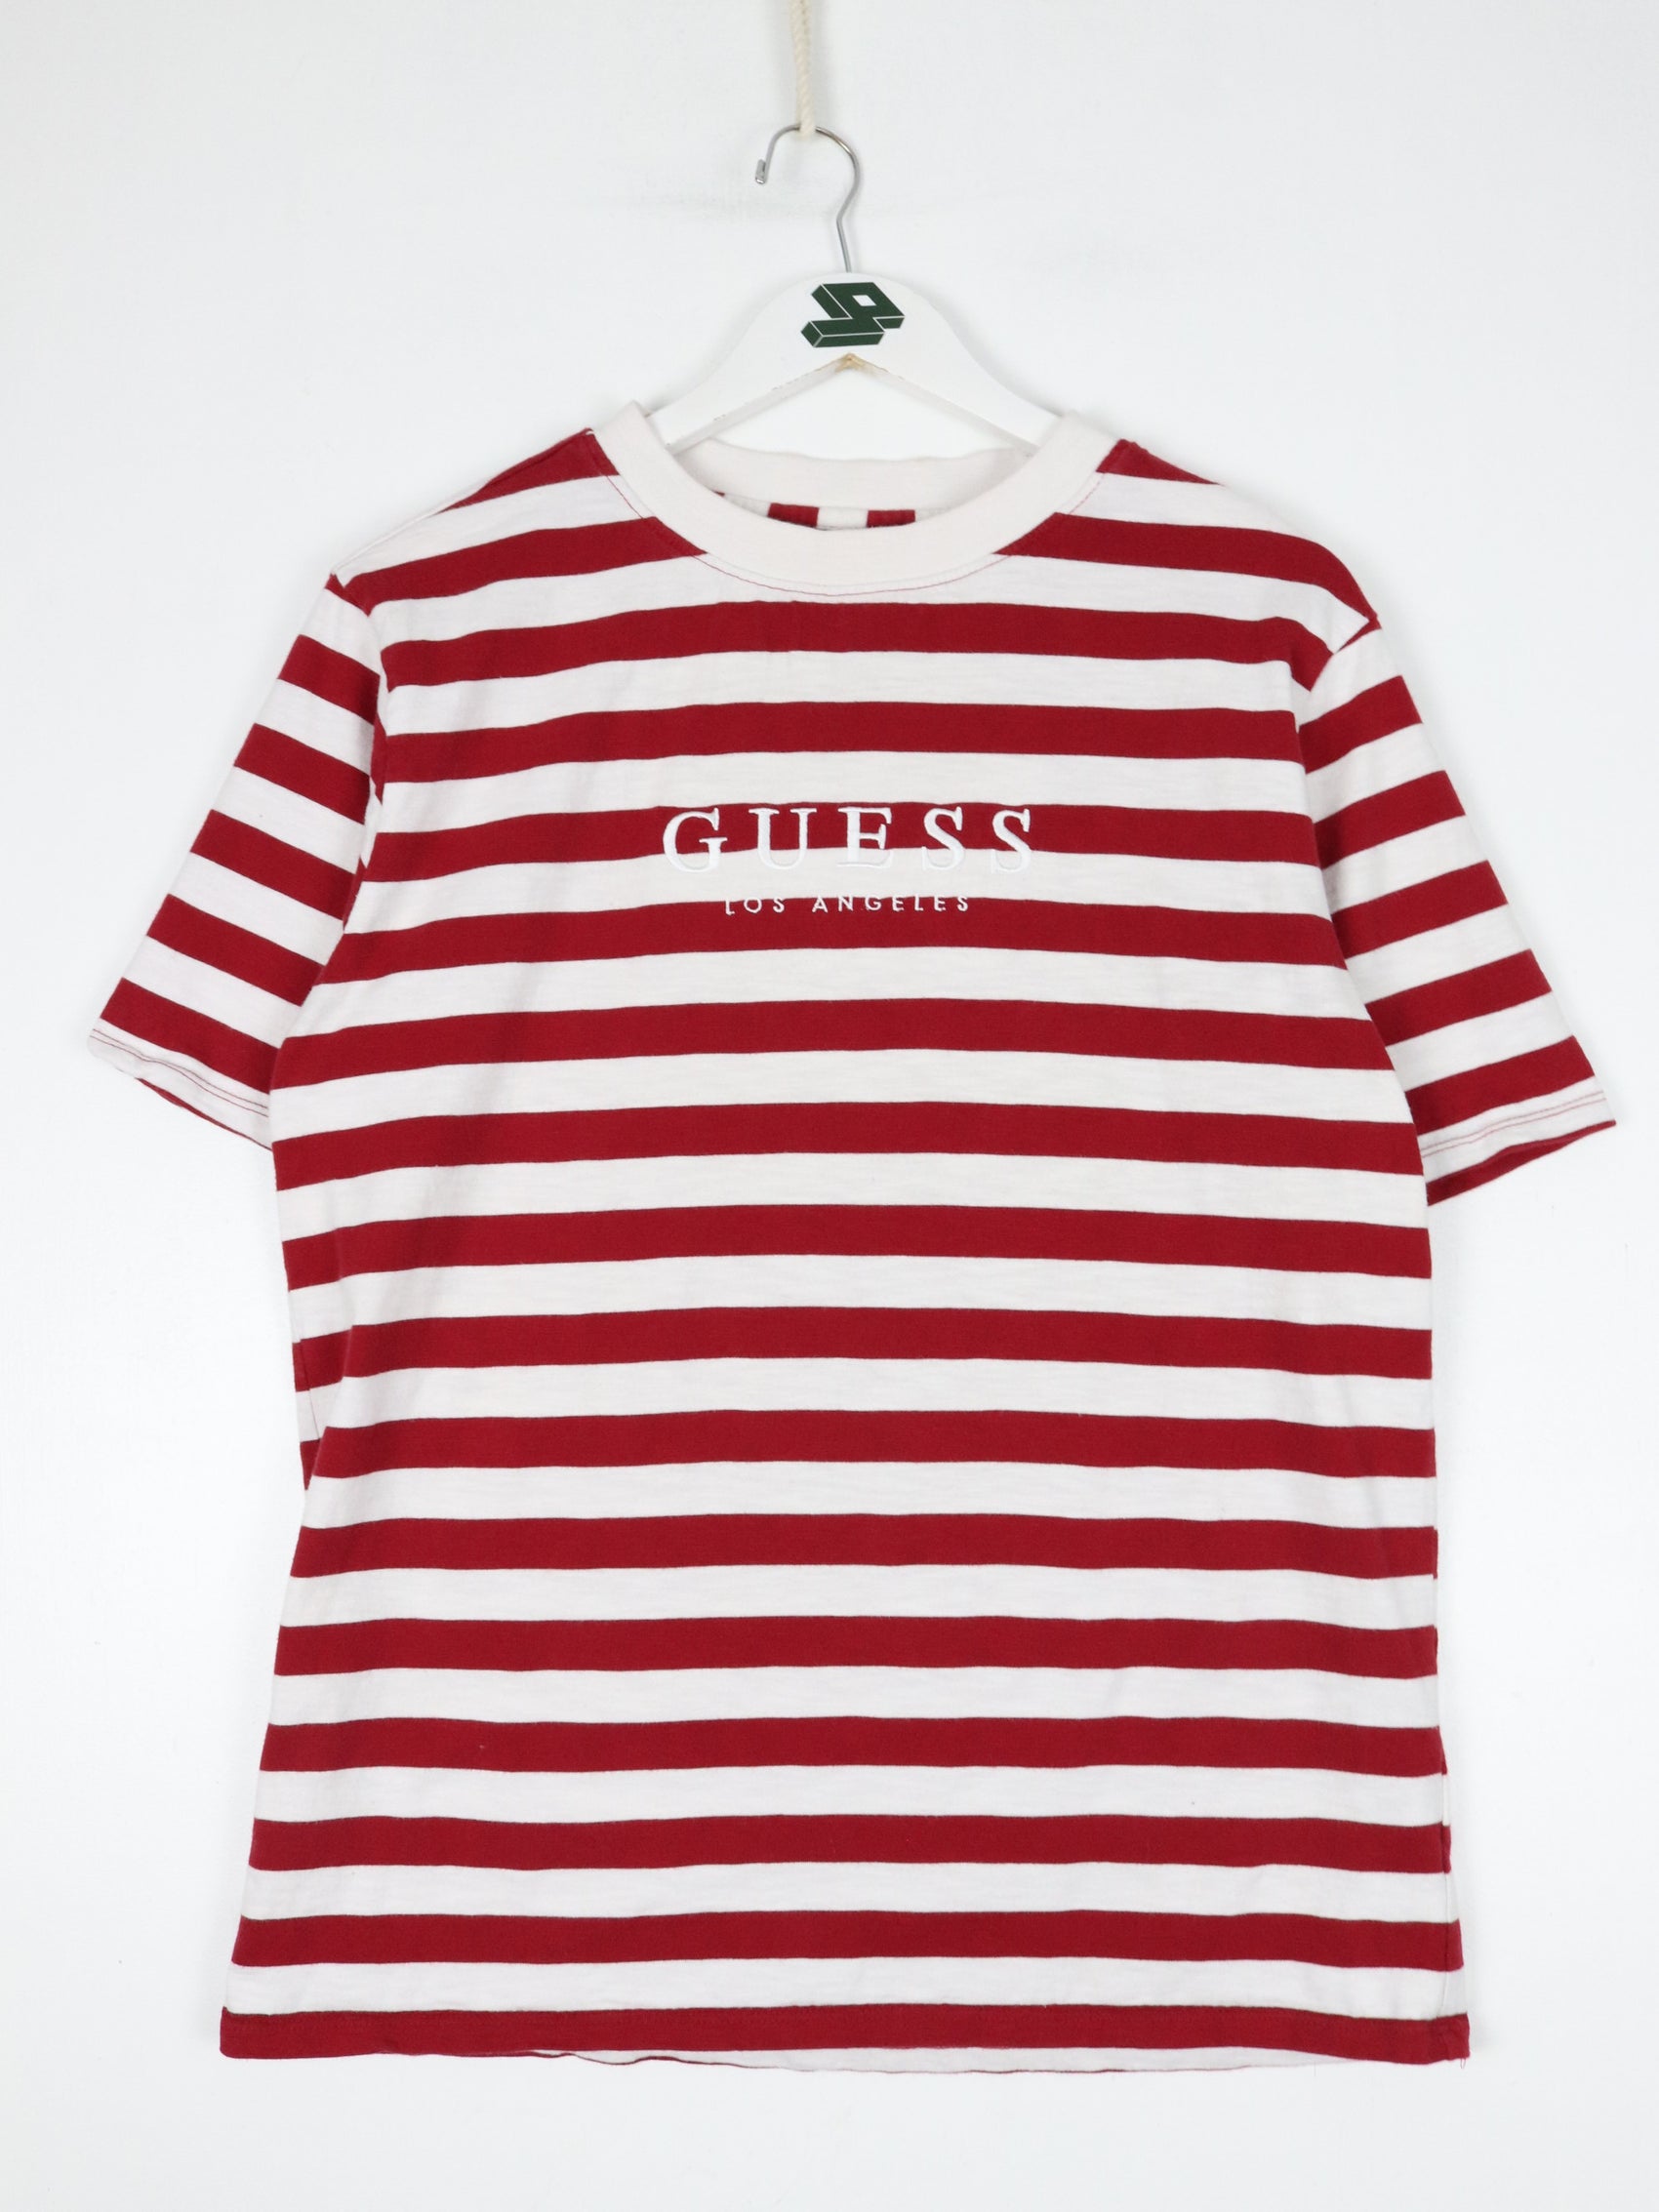 Guess T Shirt Mens Small White Red Striped